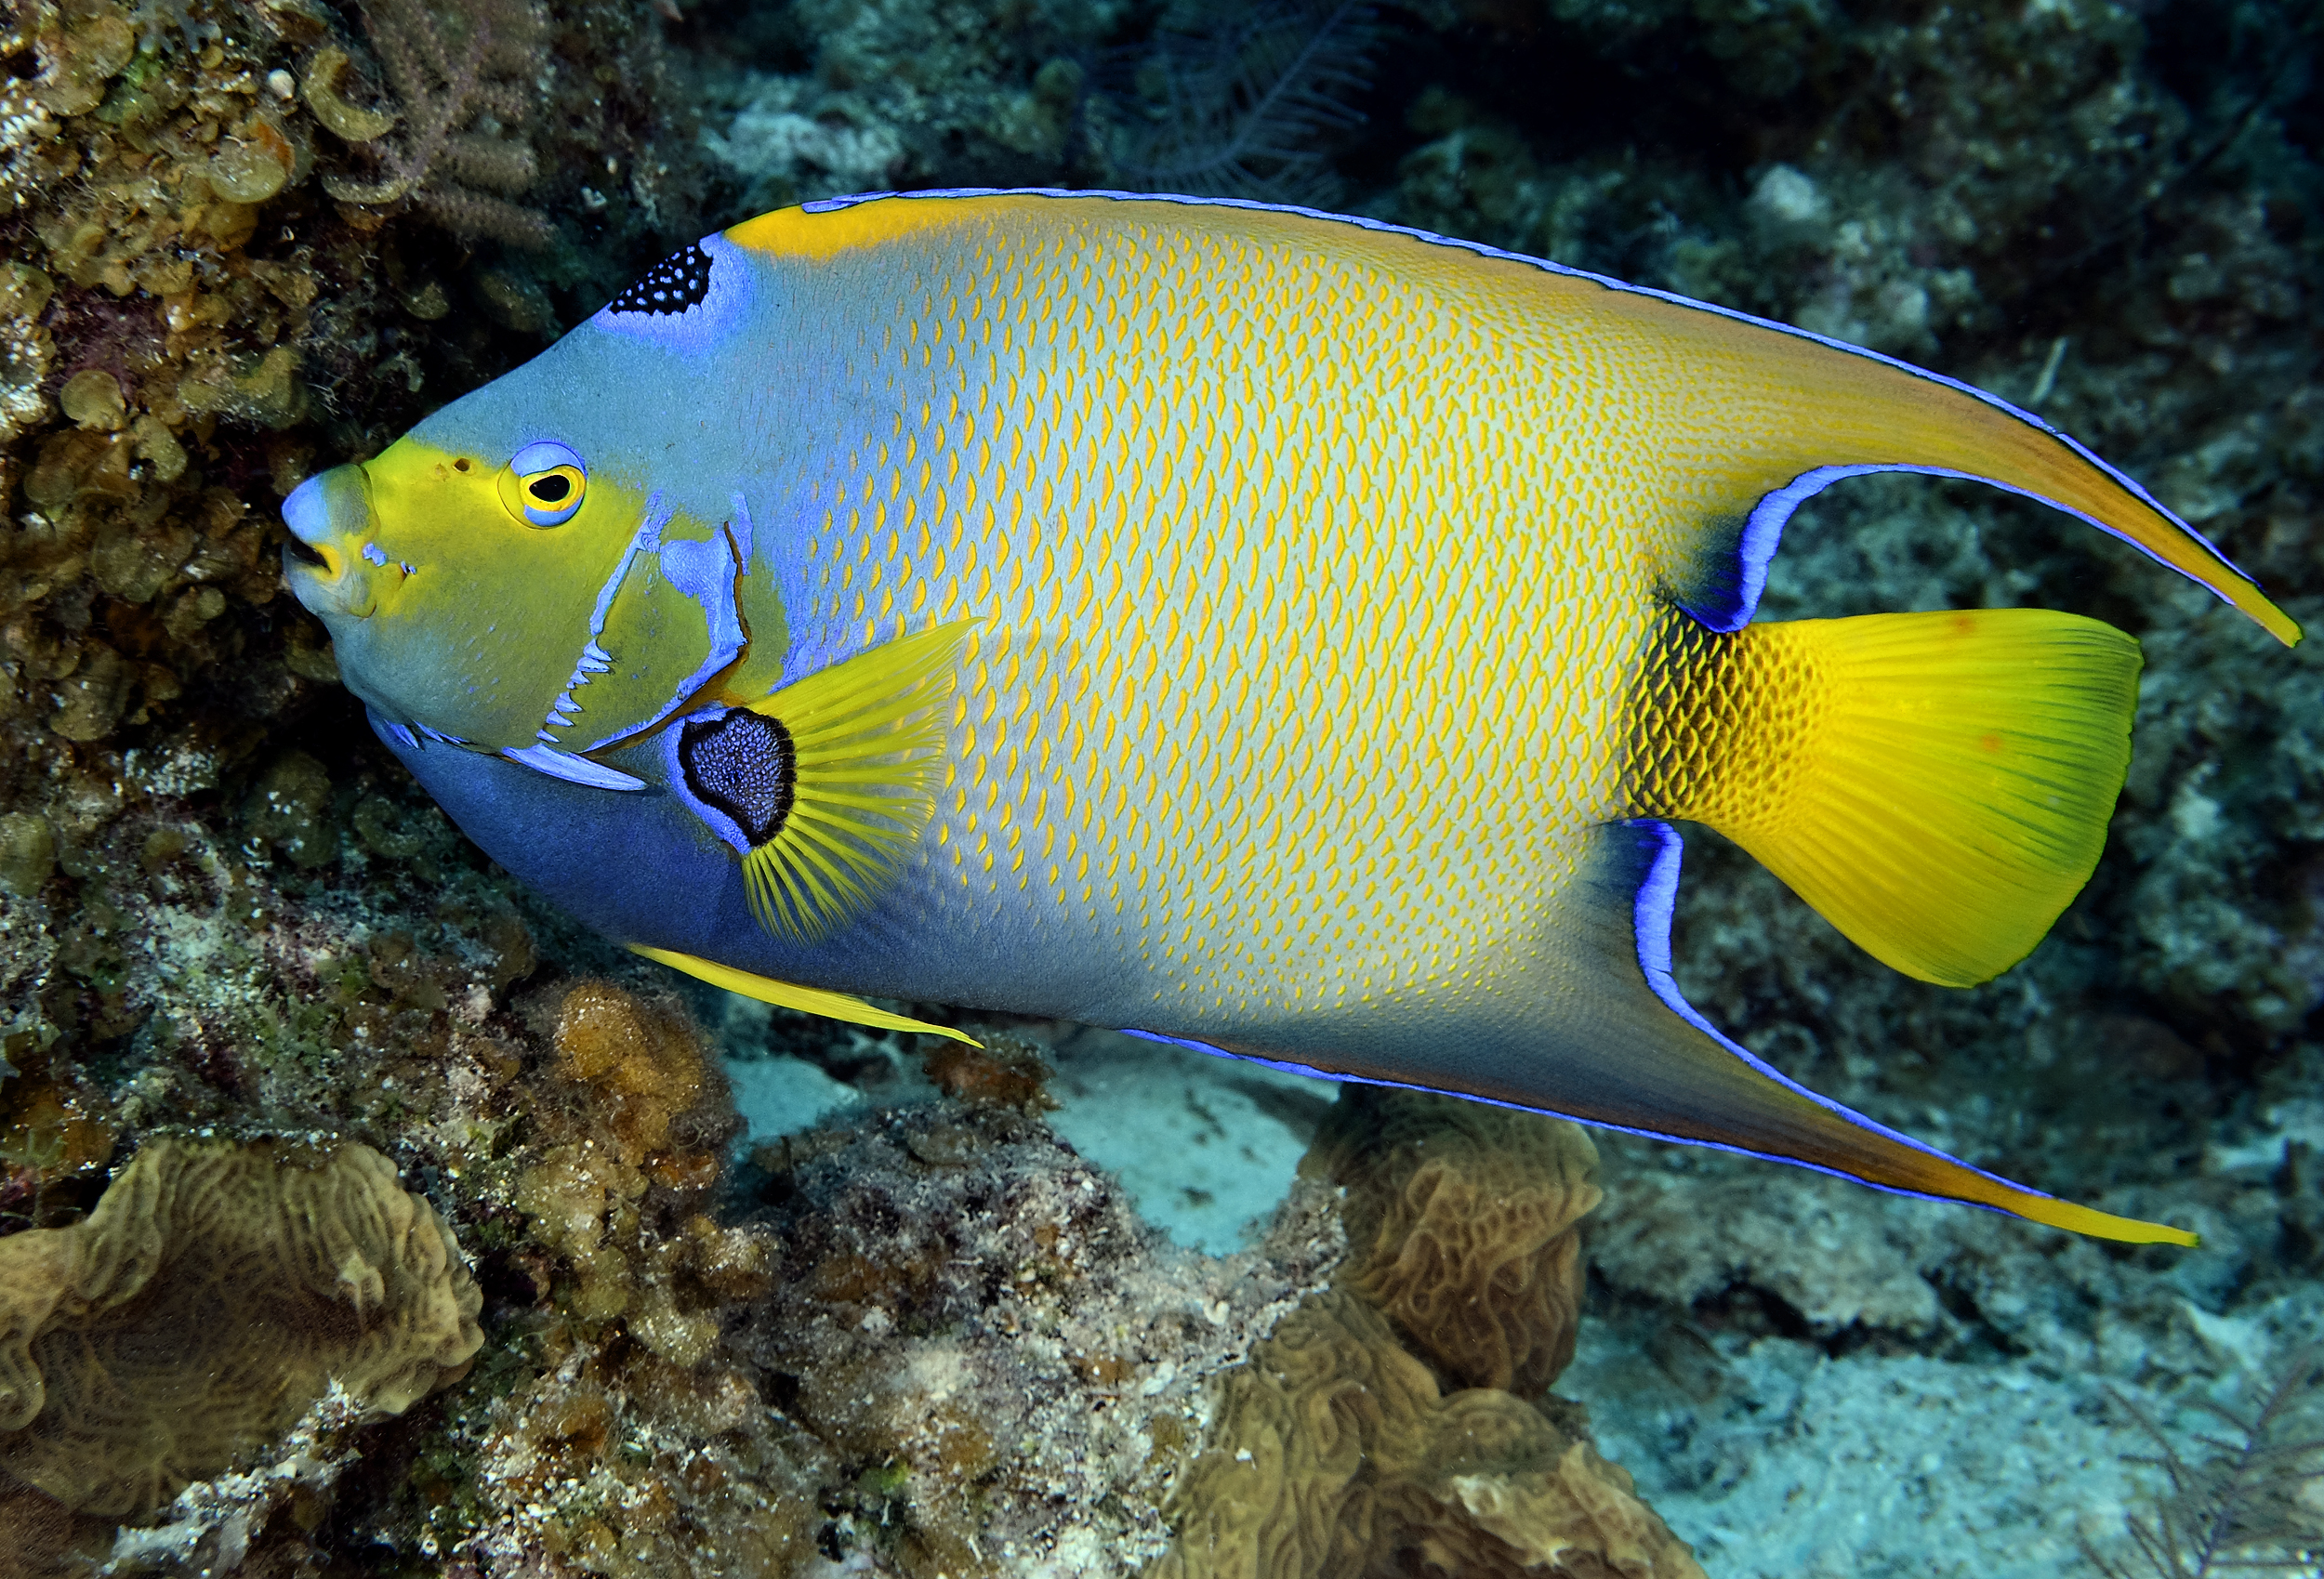 Queen angelfish, Turks and Caicos. Photo by Scott Johnson